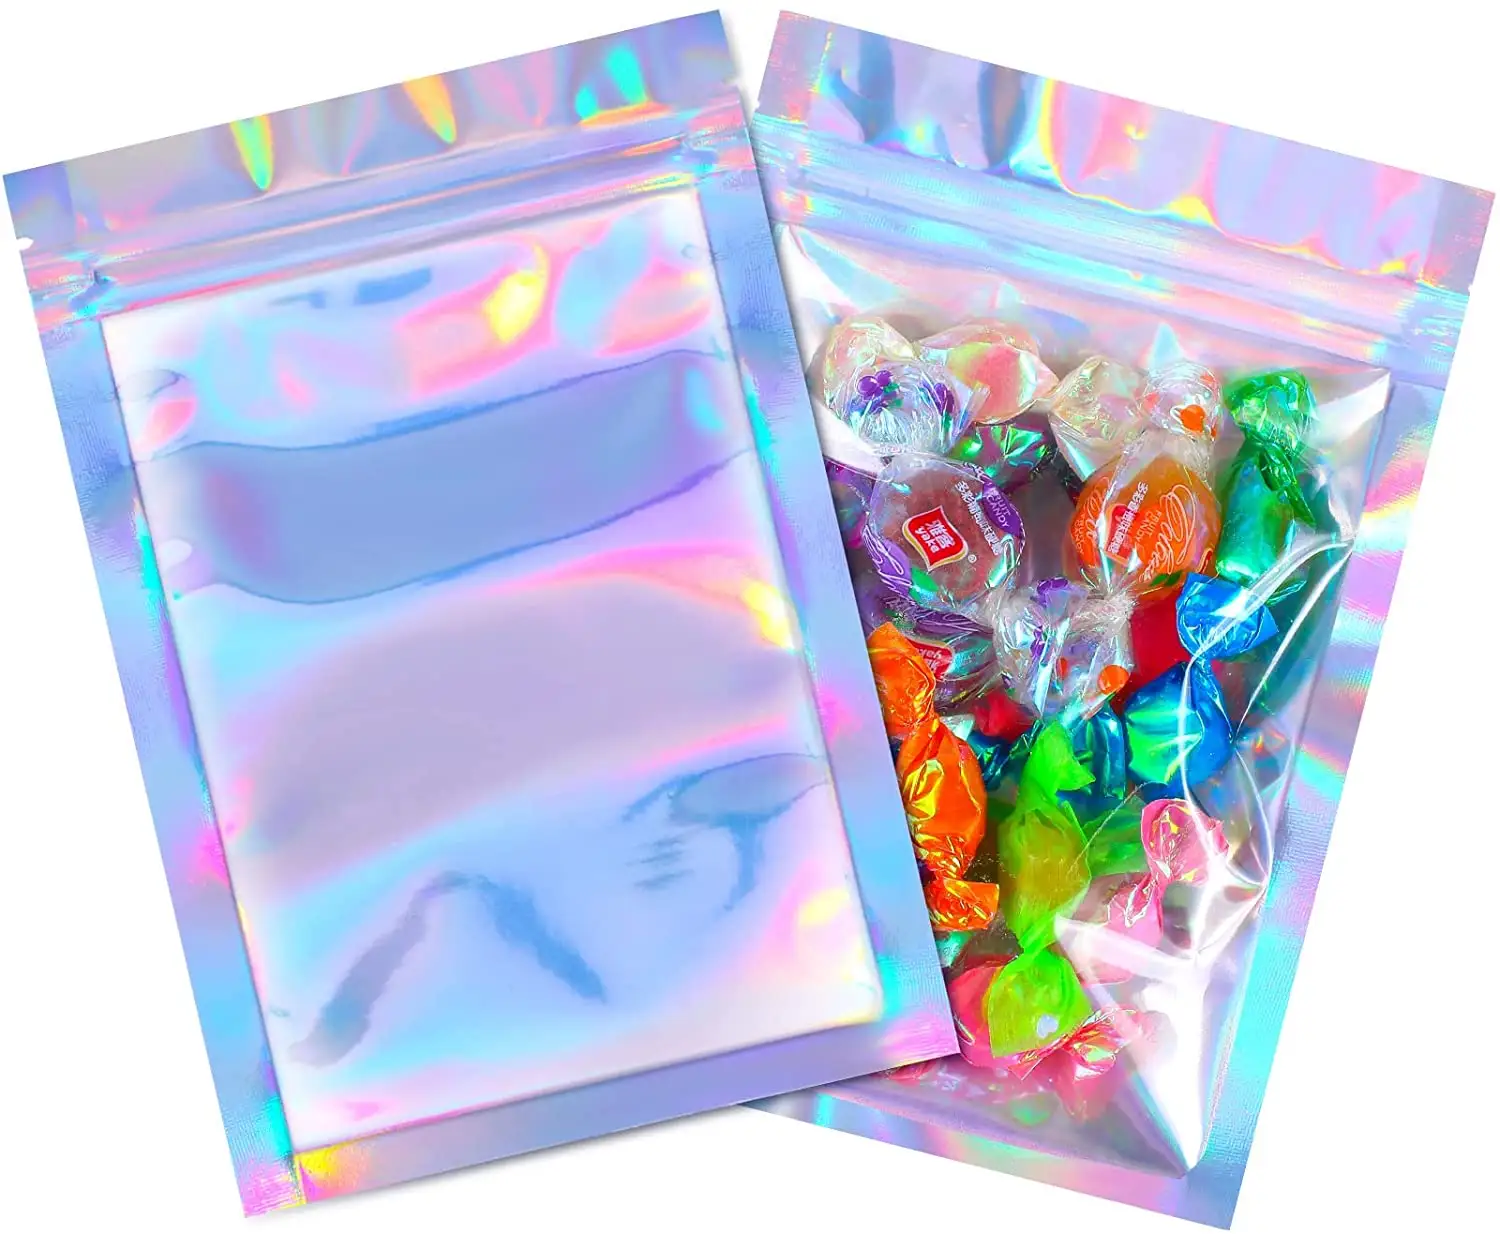 4 x 6 Inch 100 Pieces Resealable Smell Proof Holographic Color Bags Foil Pouch Bag Flat Bag for Party Favor Food Storage